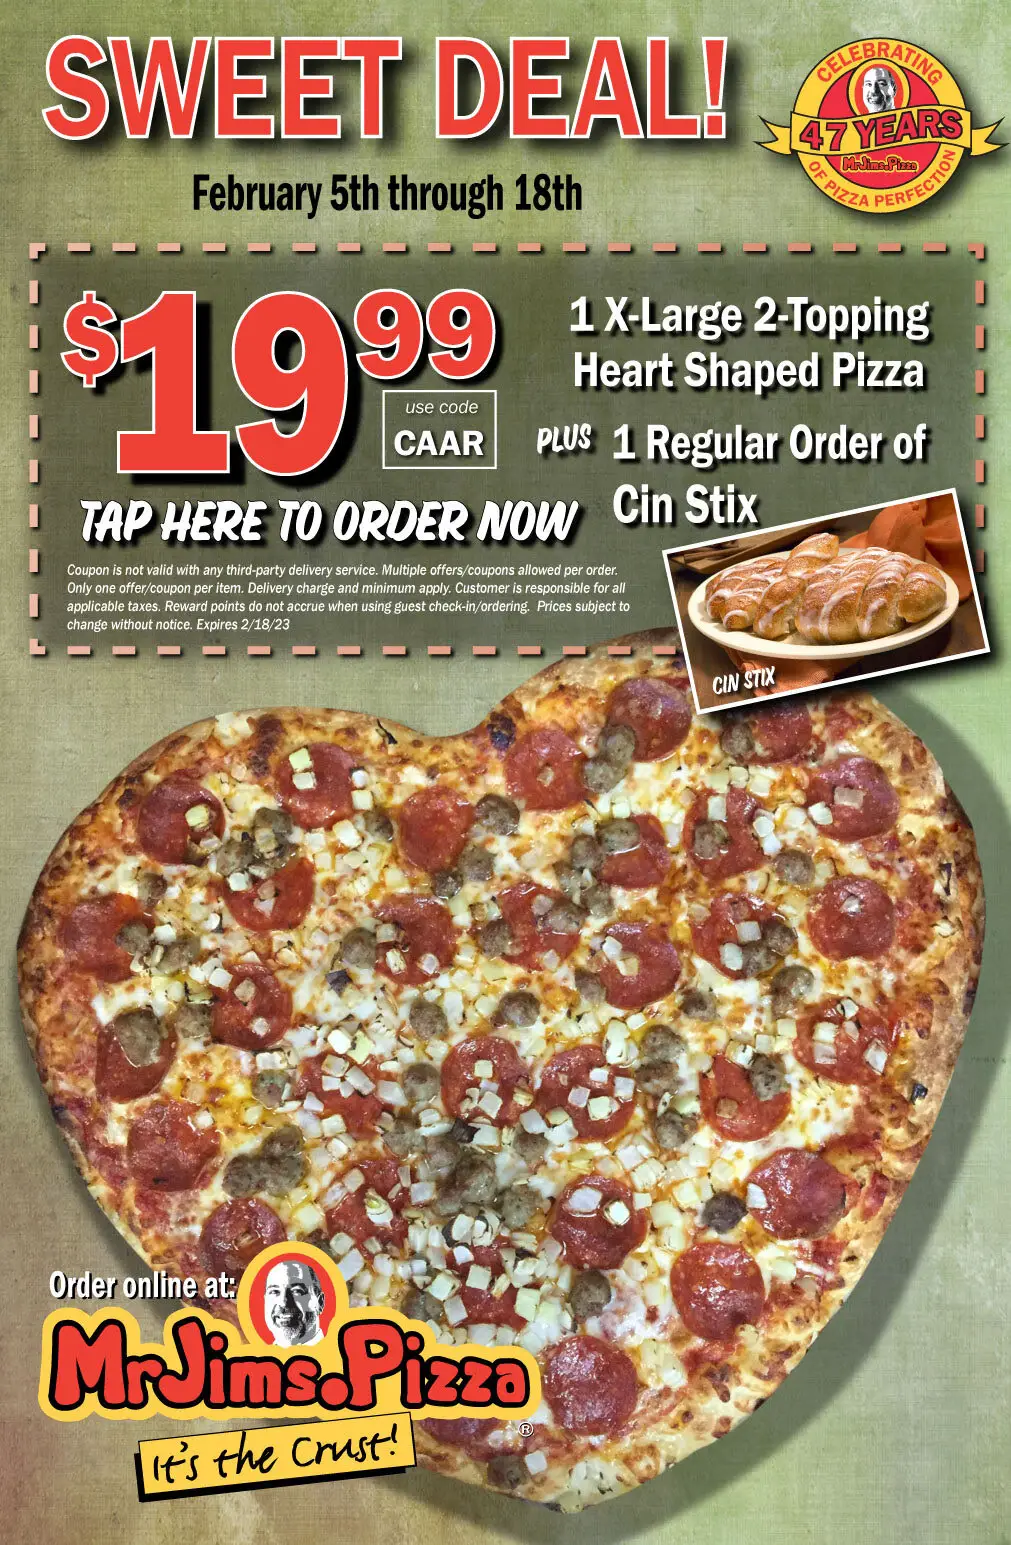 Mr. Jim's Pizza Valentine's Day 1 Extralarge Original 2-Topping Heart-Shaped Pizza and 1 CinStix for Only $19.99